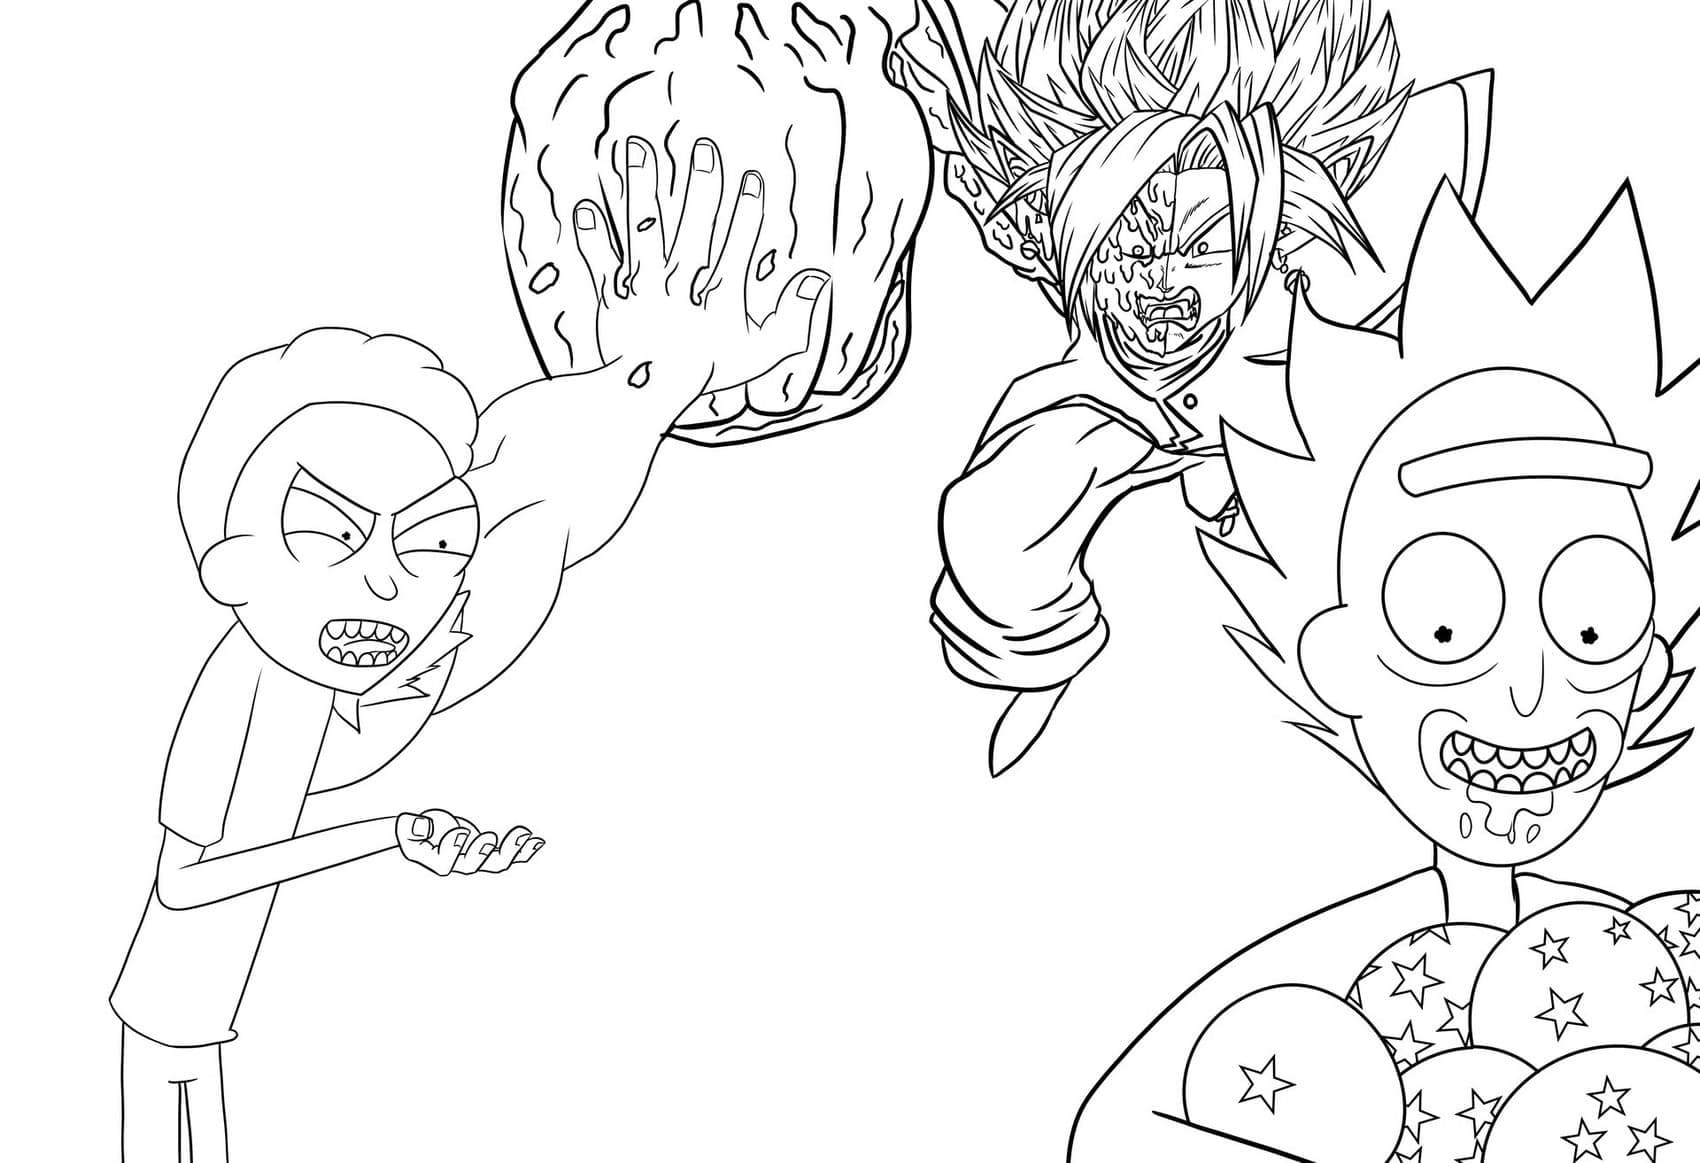 Rick et Morty Dragon Ball coloring page